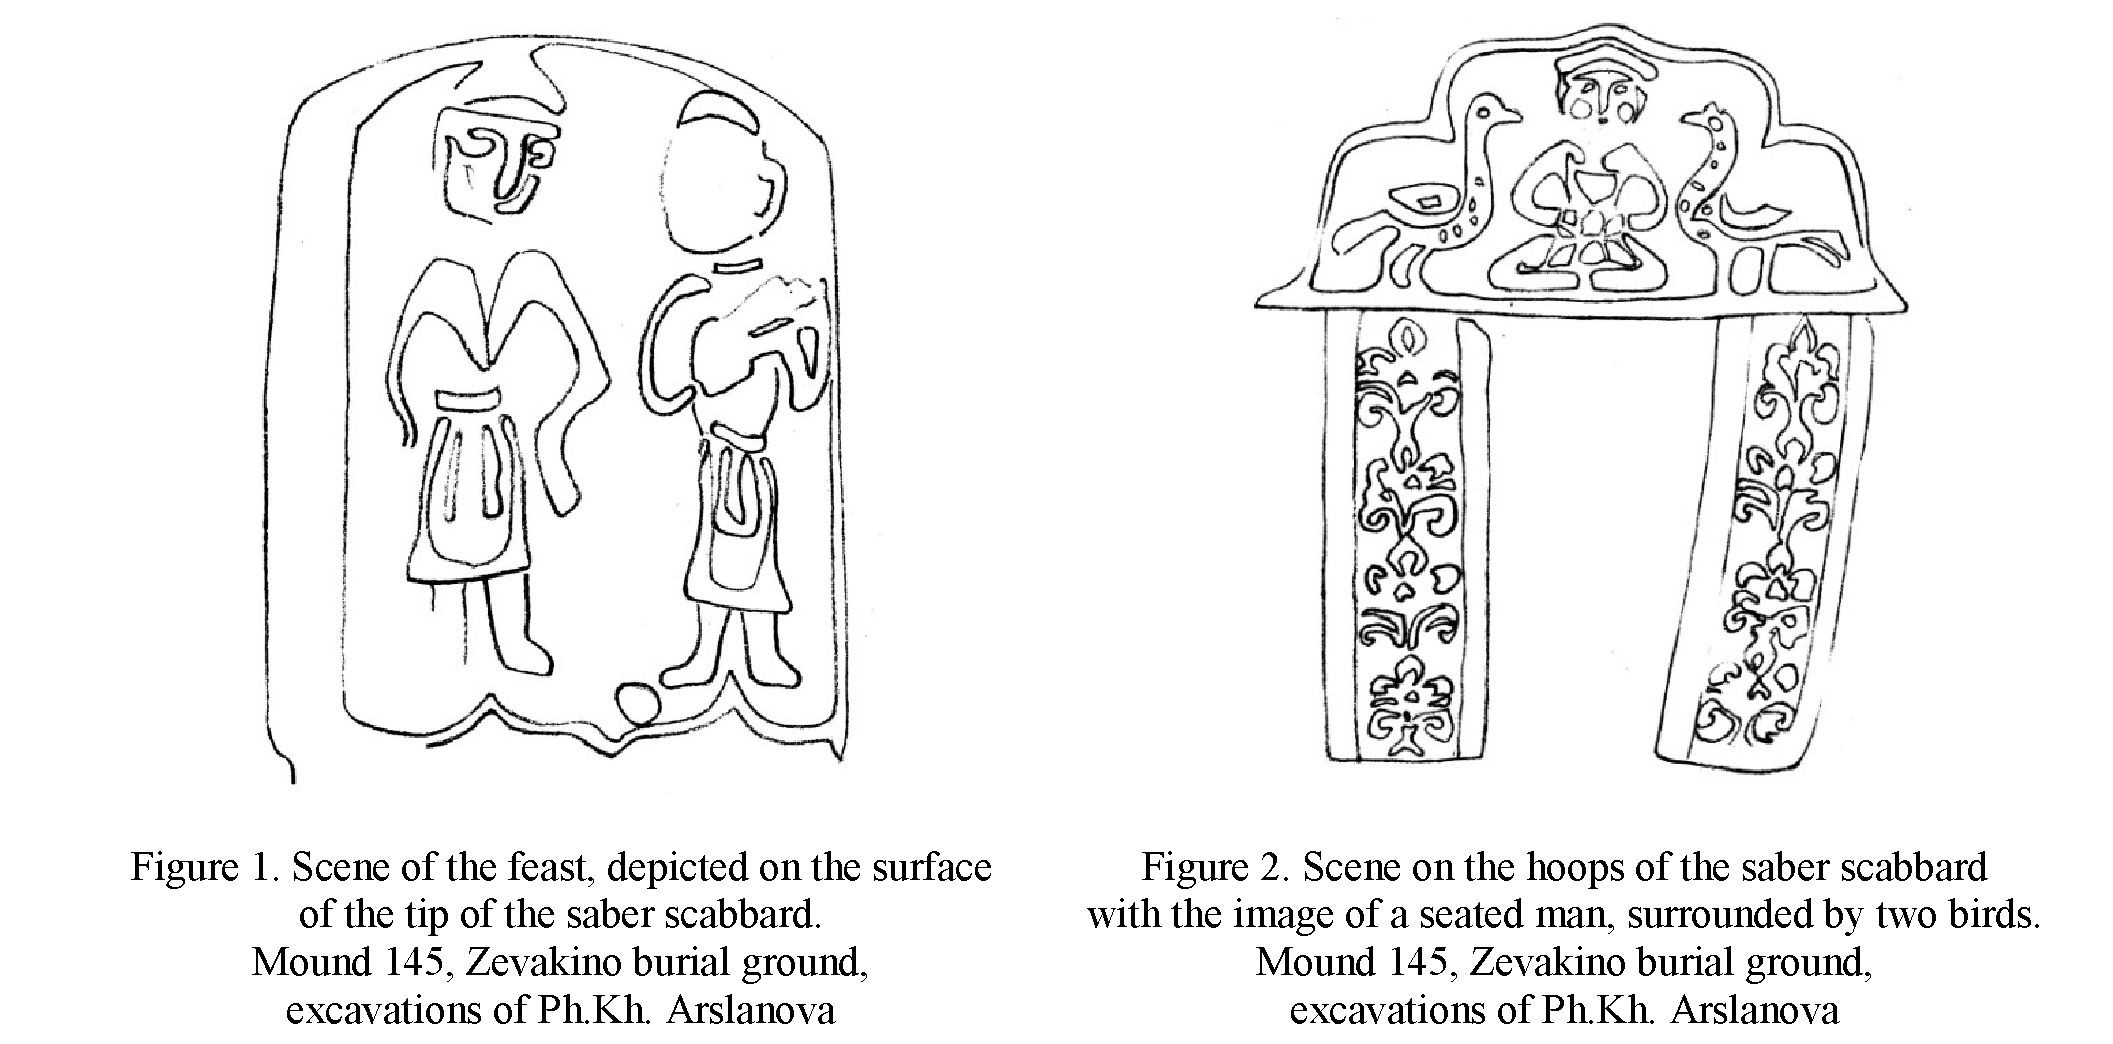 Antropomorphic images in the touretics of the Middle Ages of the steppe Eurasia